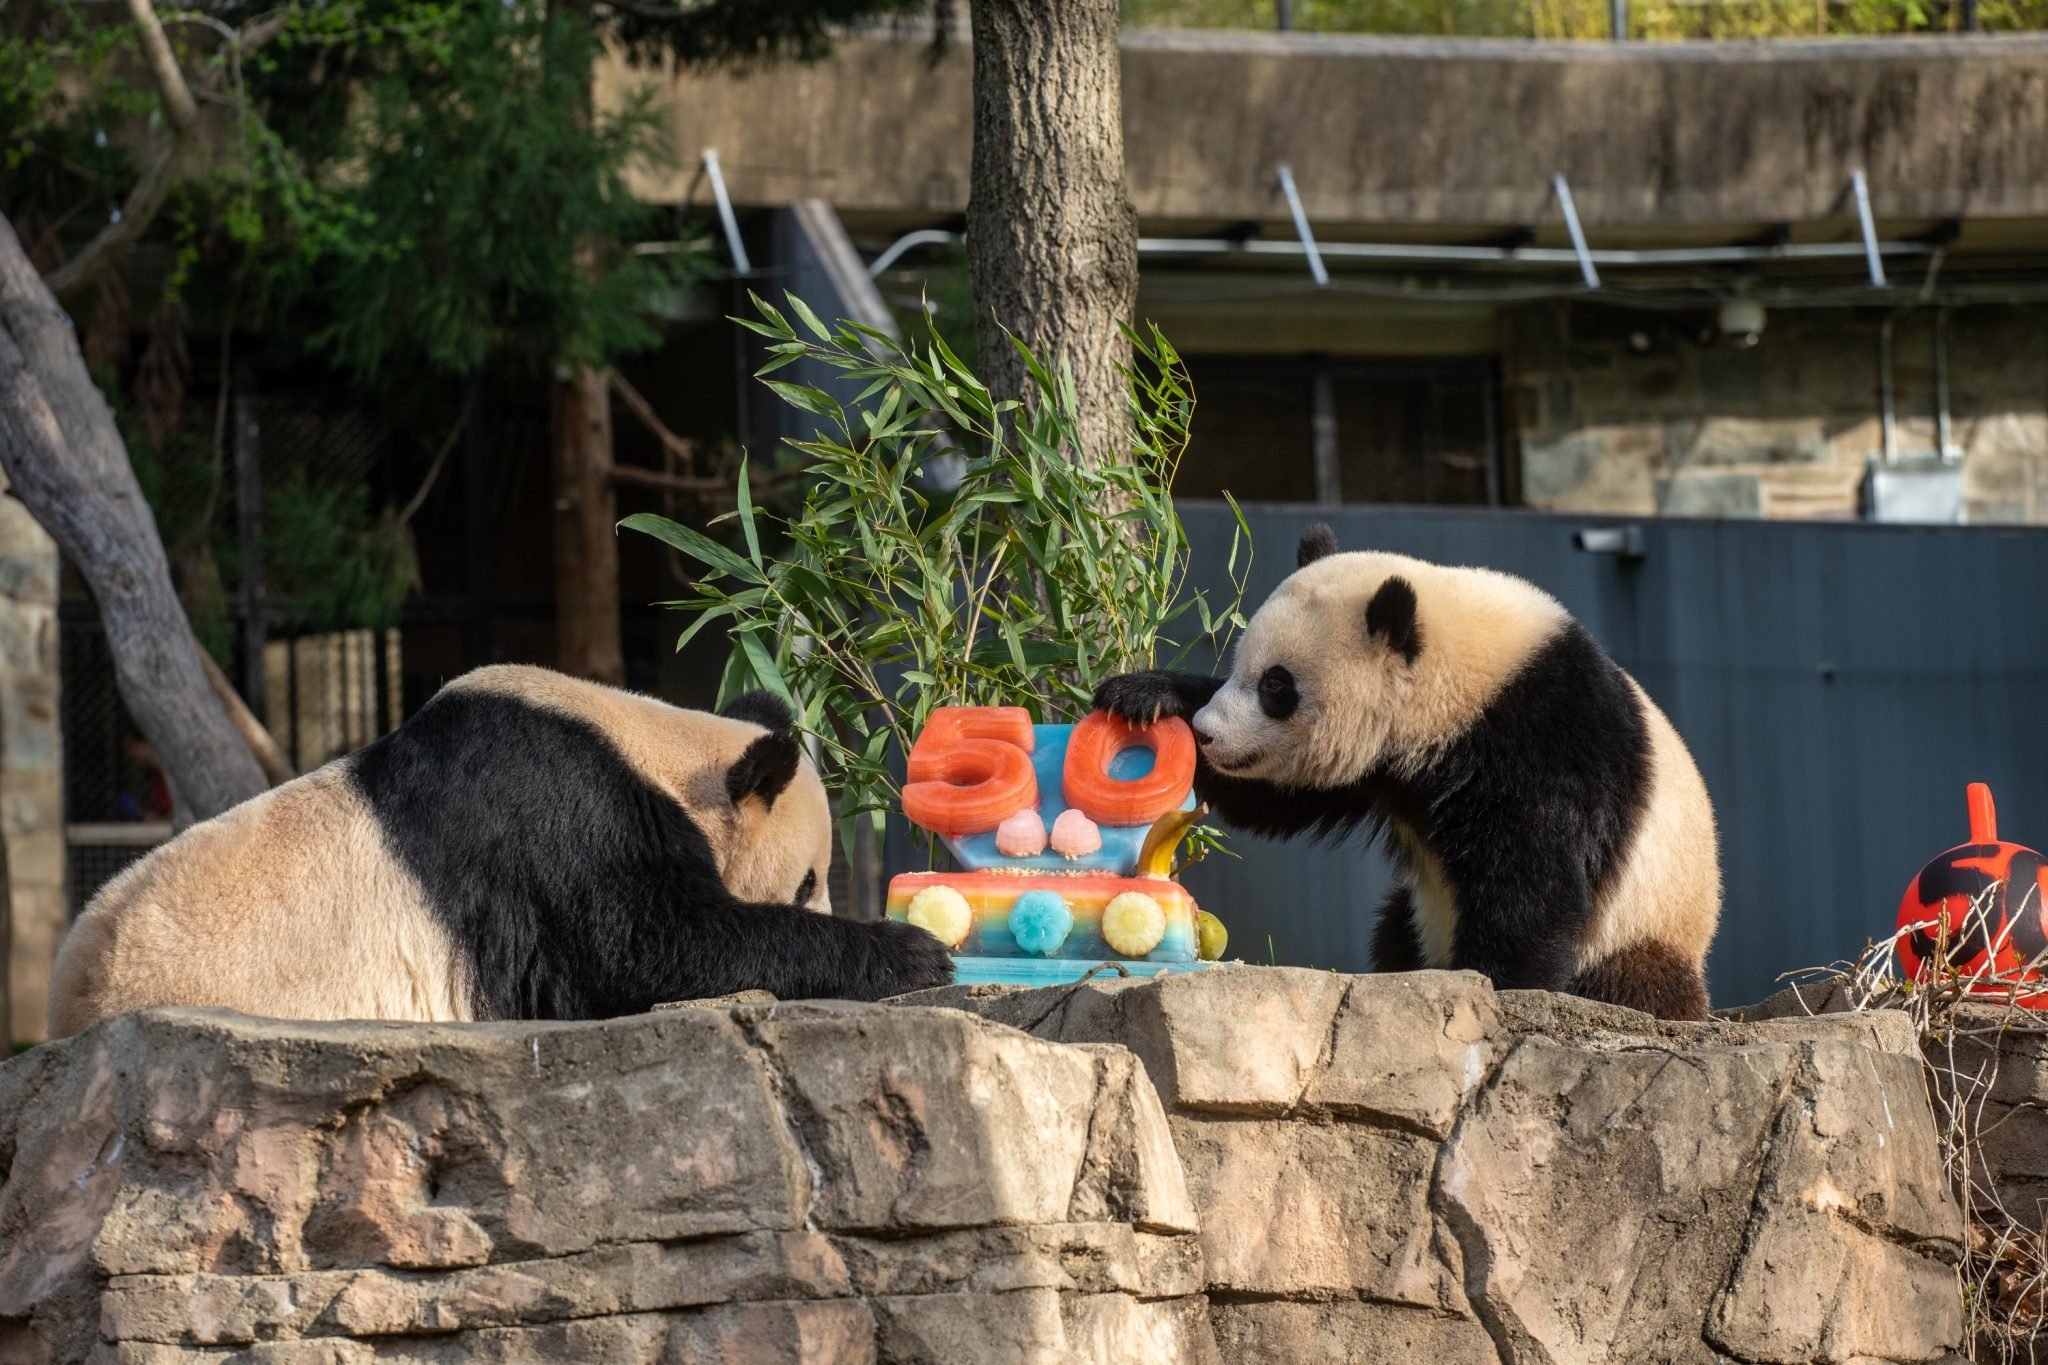 Check Out the Crazy Holiday Cakes Made for Animals at the National Zoo